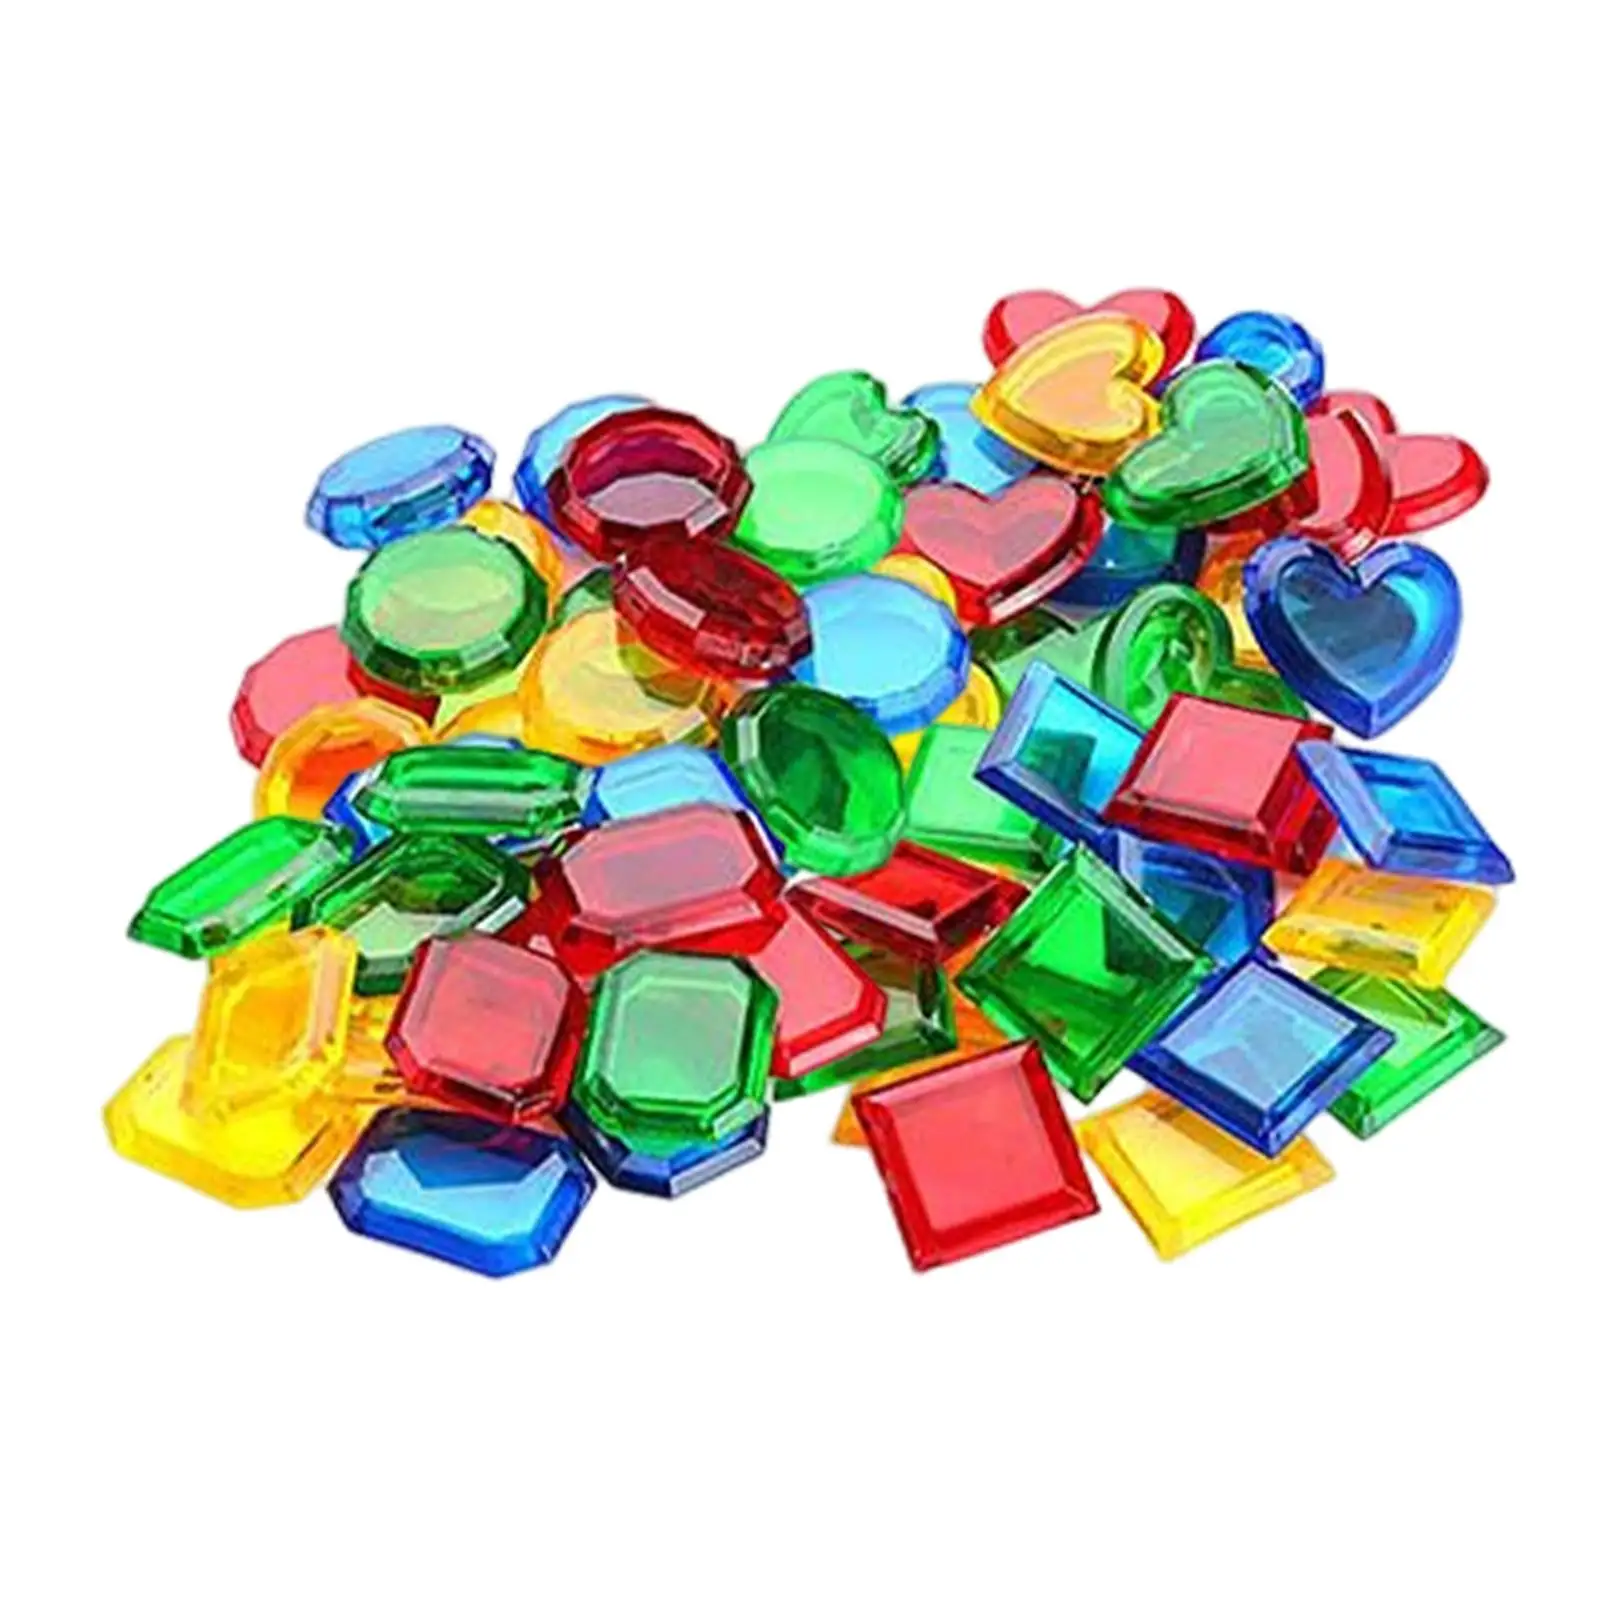 32Pcs Multipurpose Diving toy Sorting for Learning Activities Beach